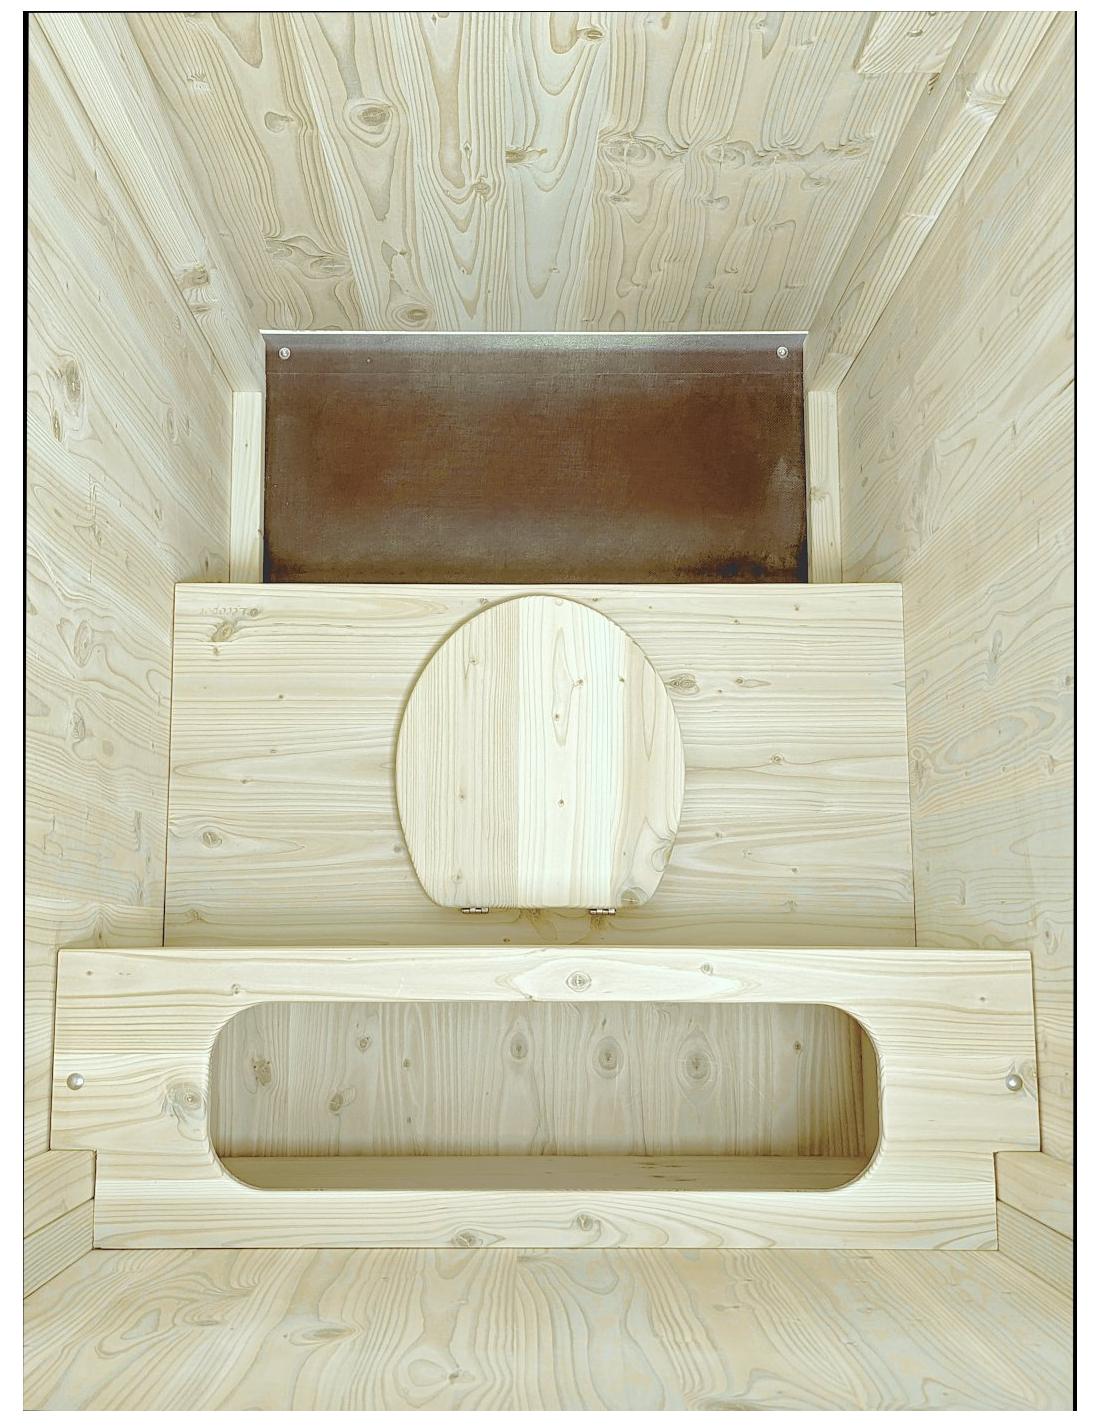 LécoBox – Outdoor dry toilet cabin by Lécopot